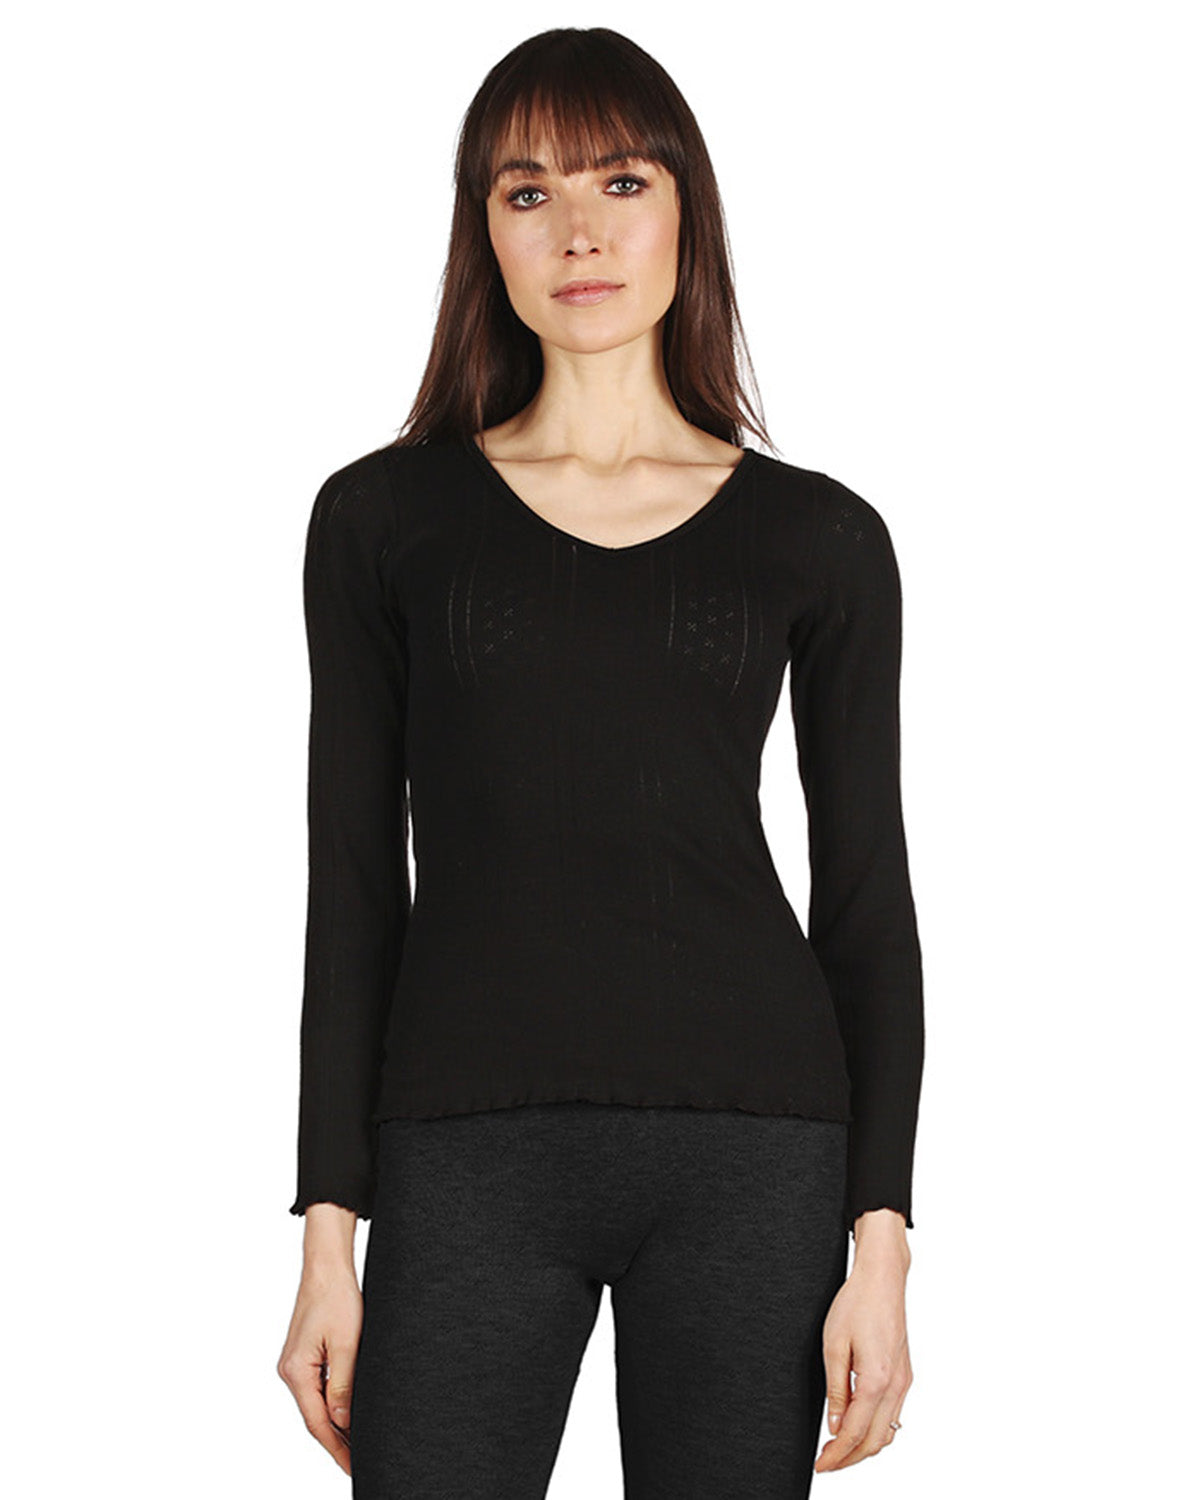 Women's Sari Athletic Long-Sleeve Tee with Mesh Insert Knit